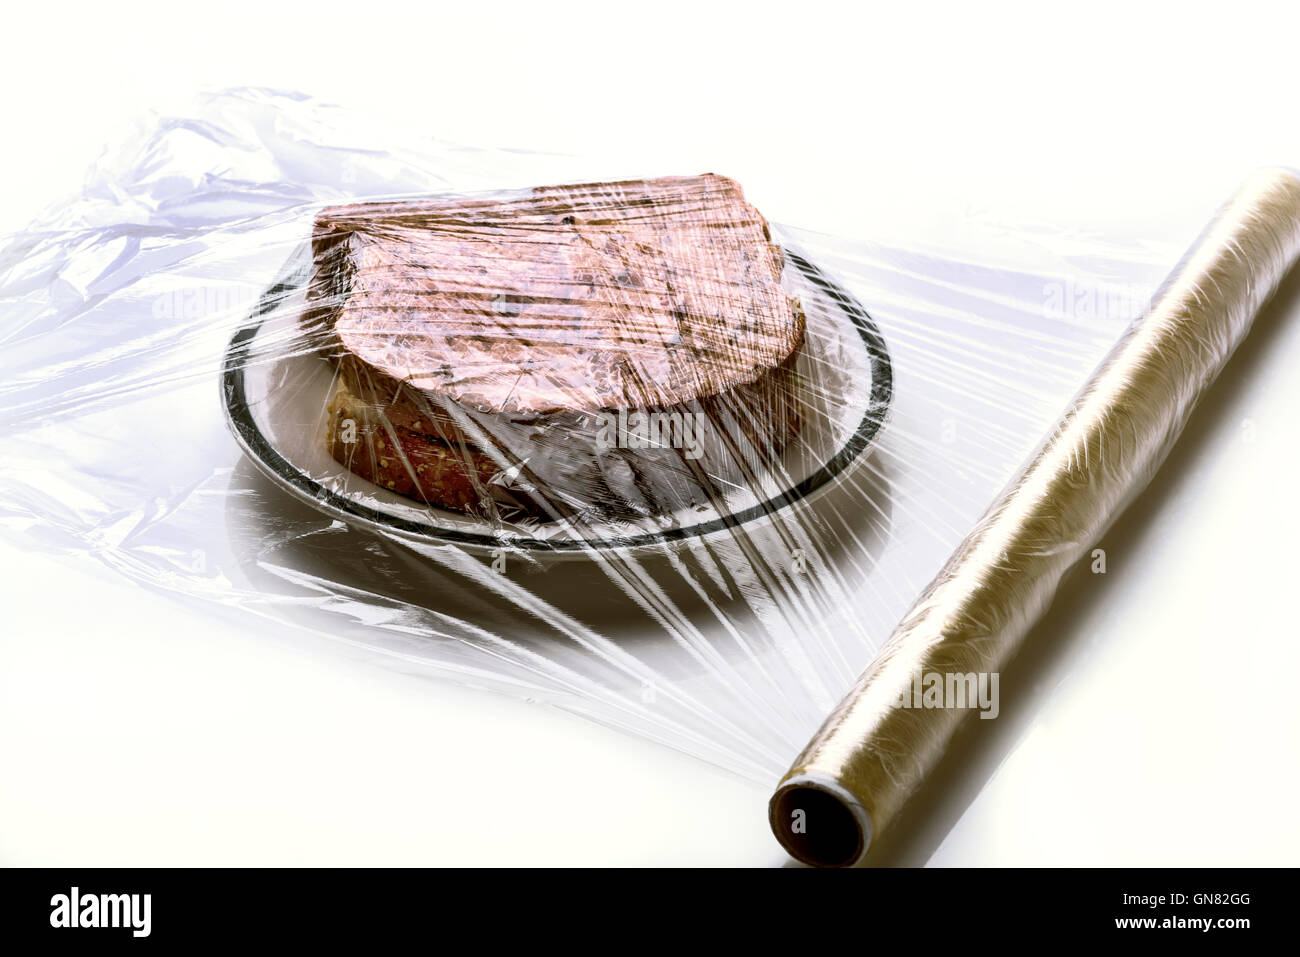 https://c8.alamy.com/comp/GN82GG/sandwich-on-a-plate-being-wrapped-in-cling-film-GN82GG.jpg